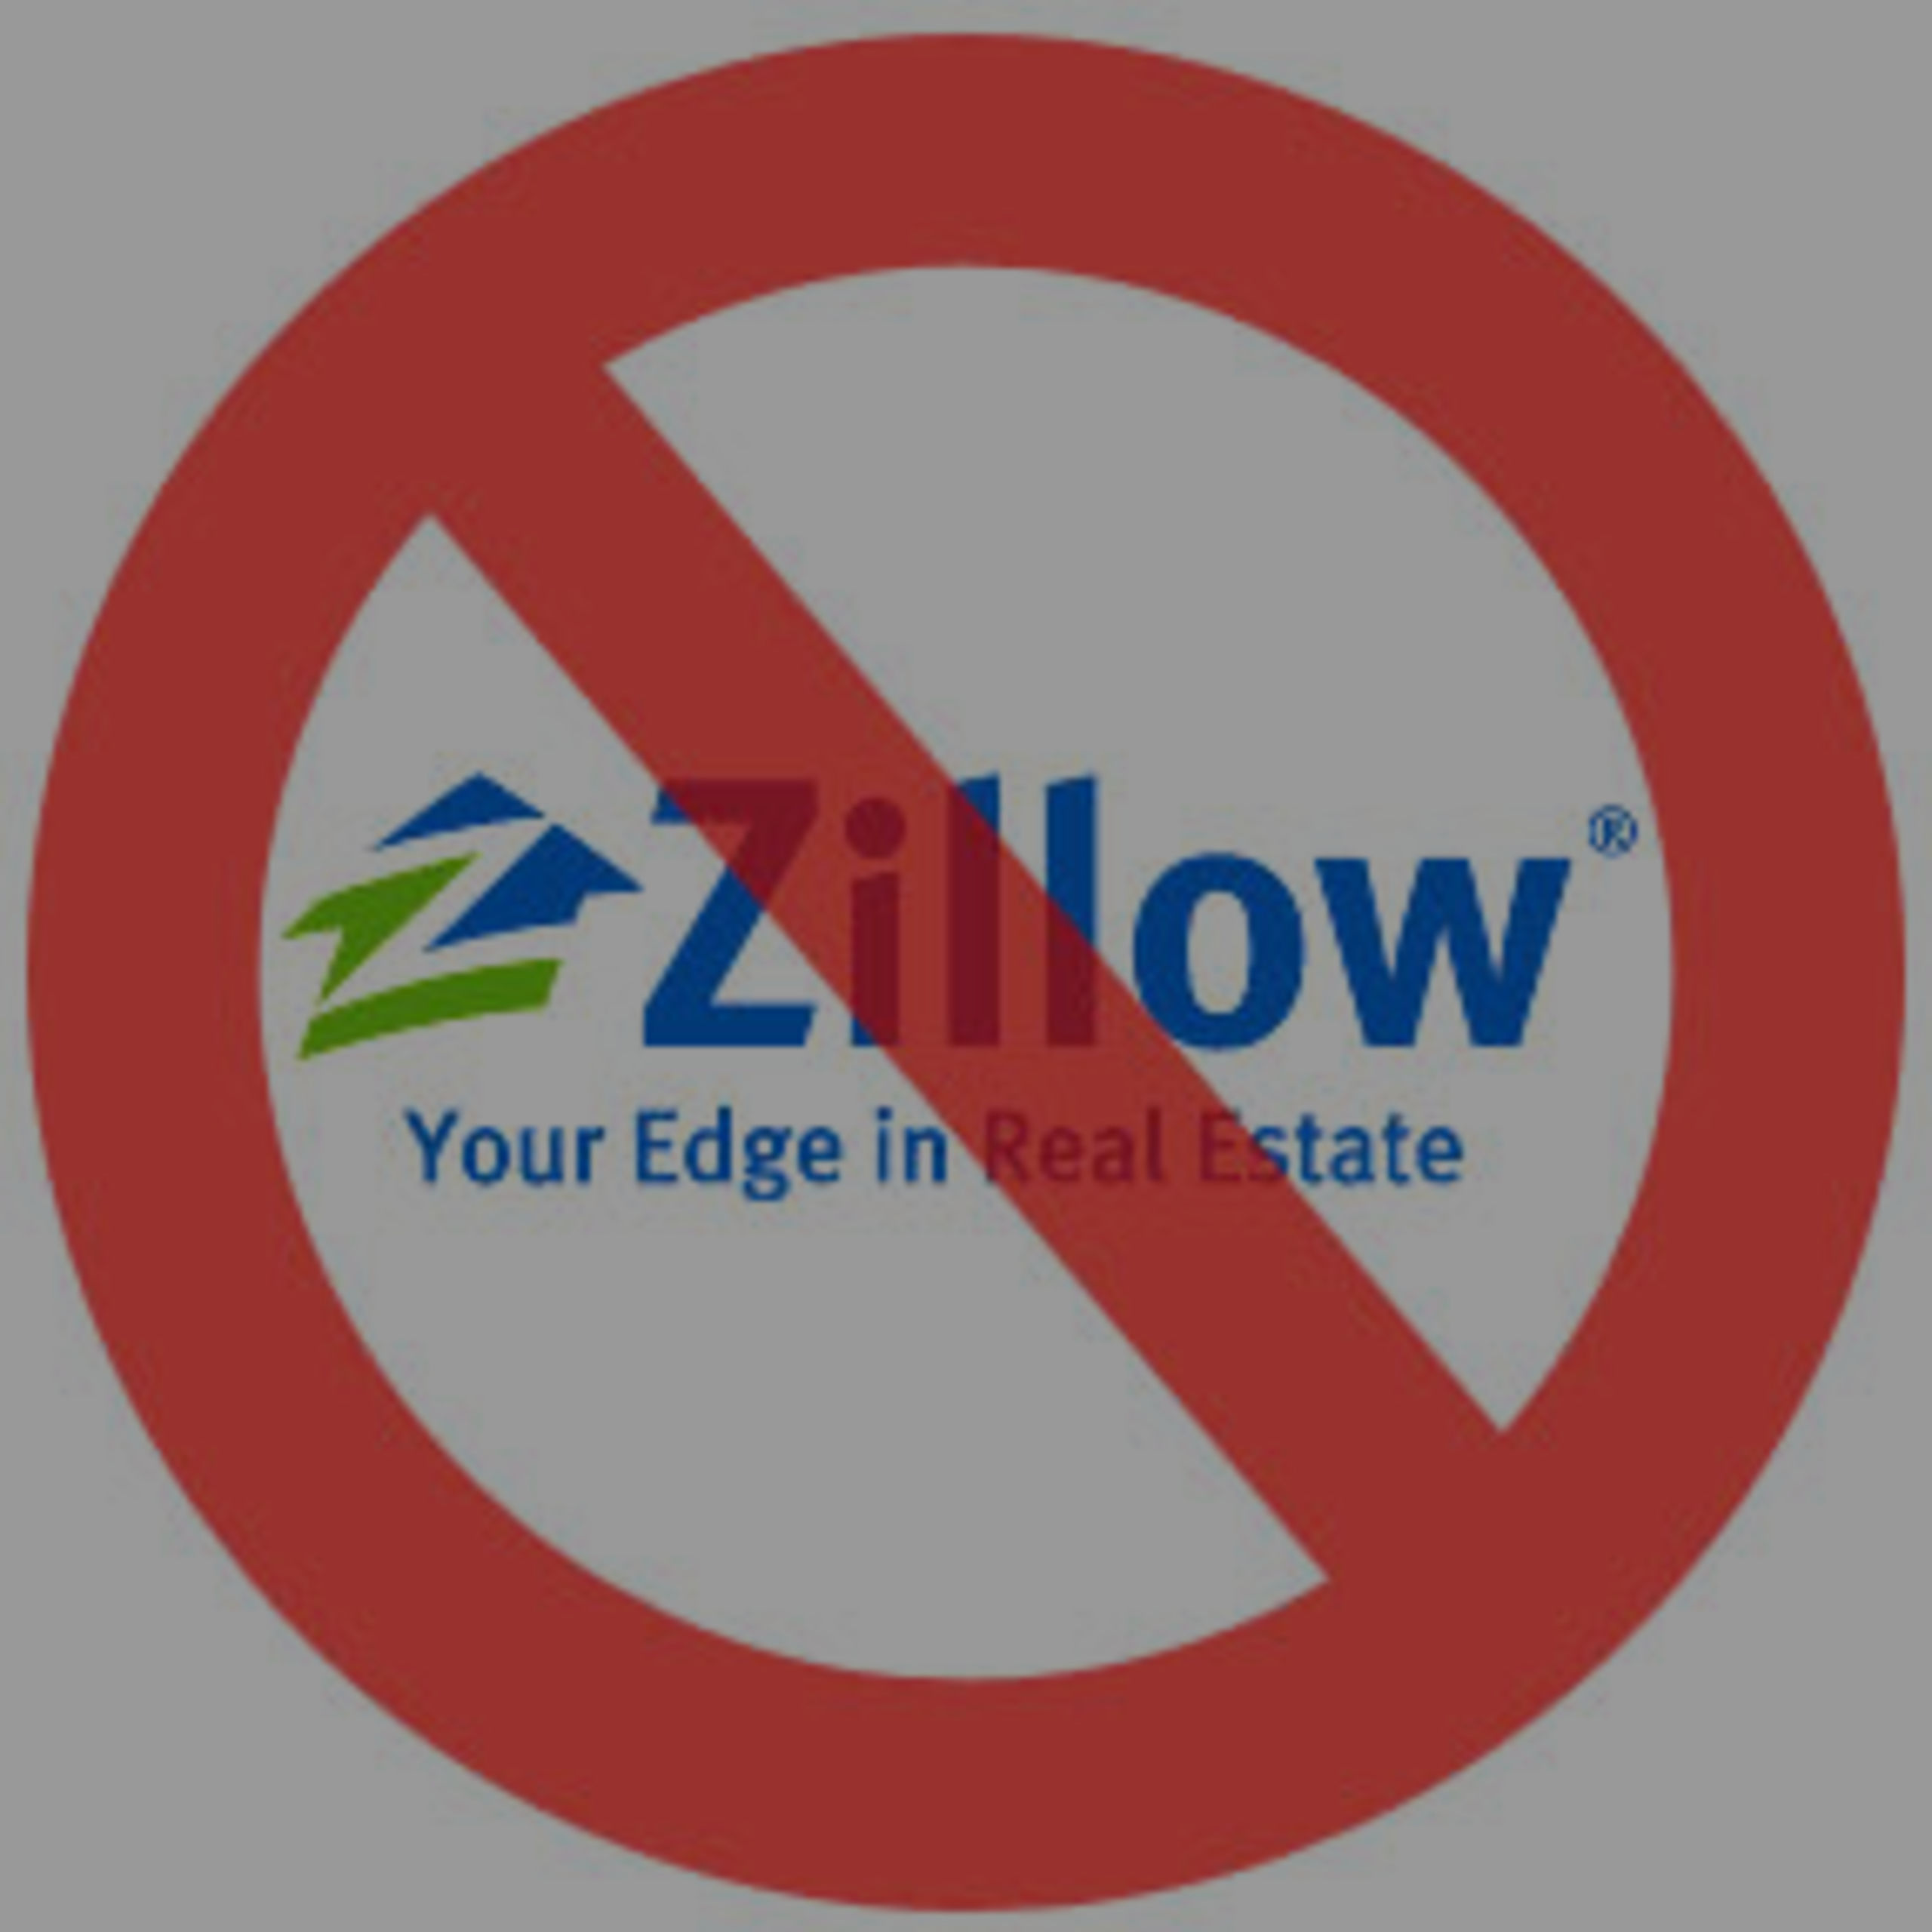 My Opinion about Zillows Opinion